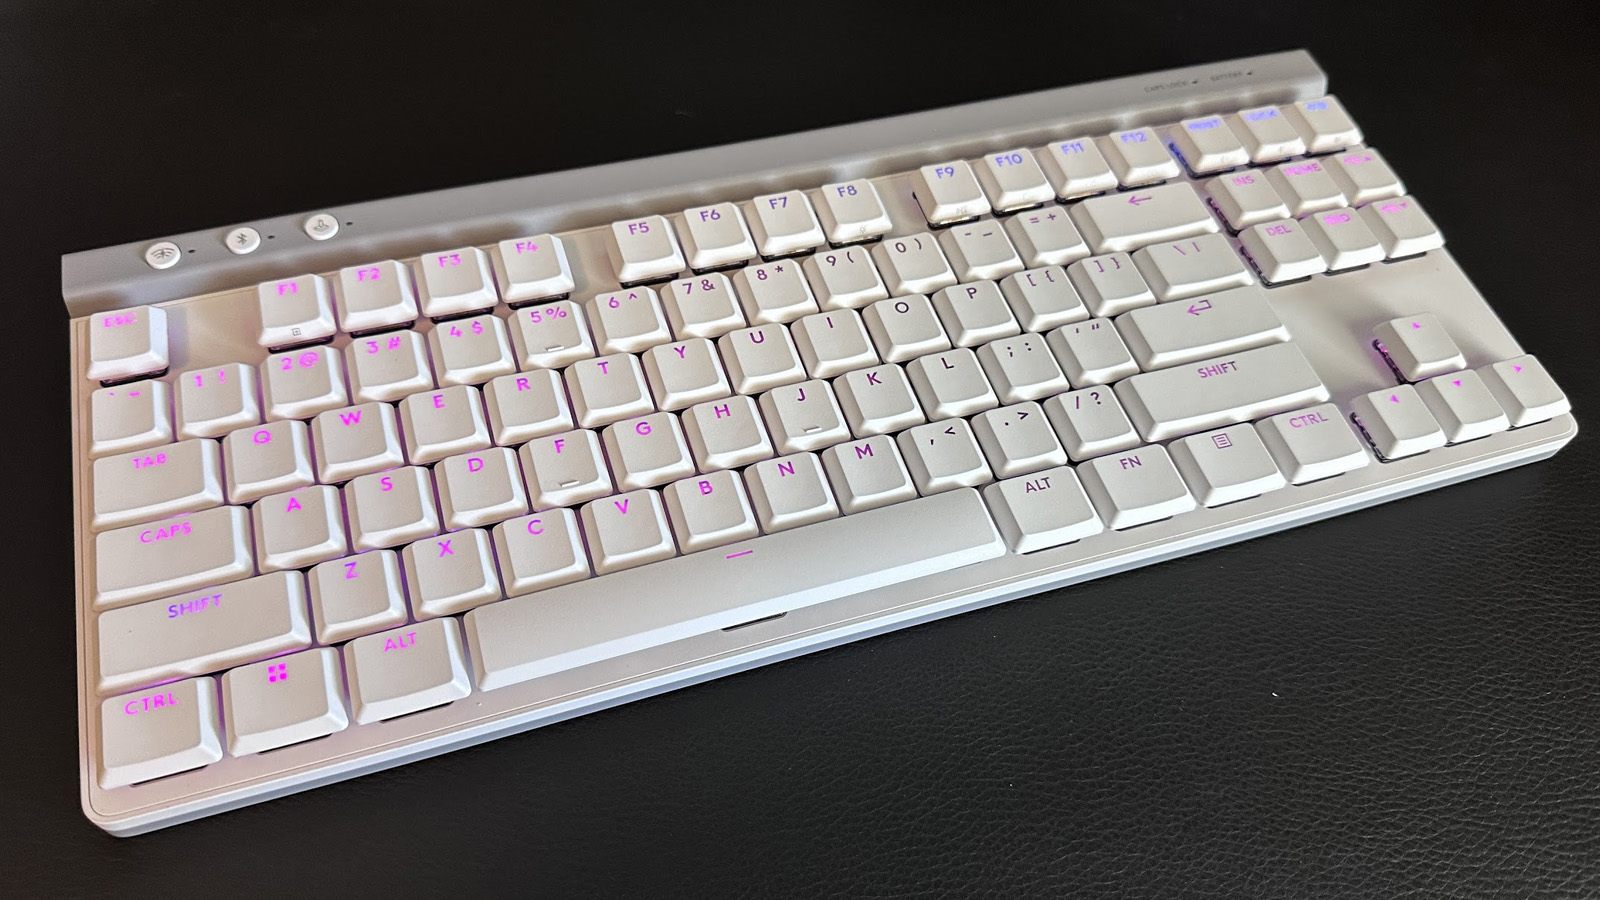 Logitech G515 Lightspeed TKL review: Almost perfect